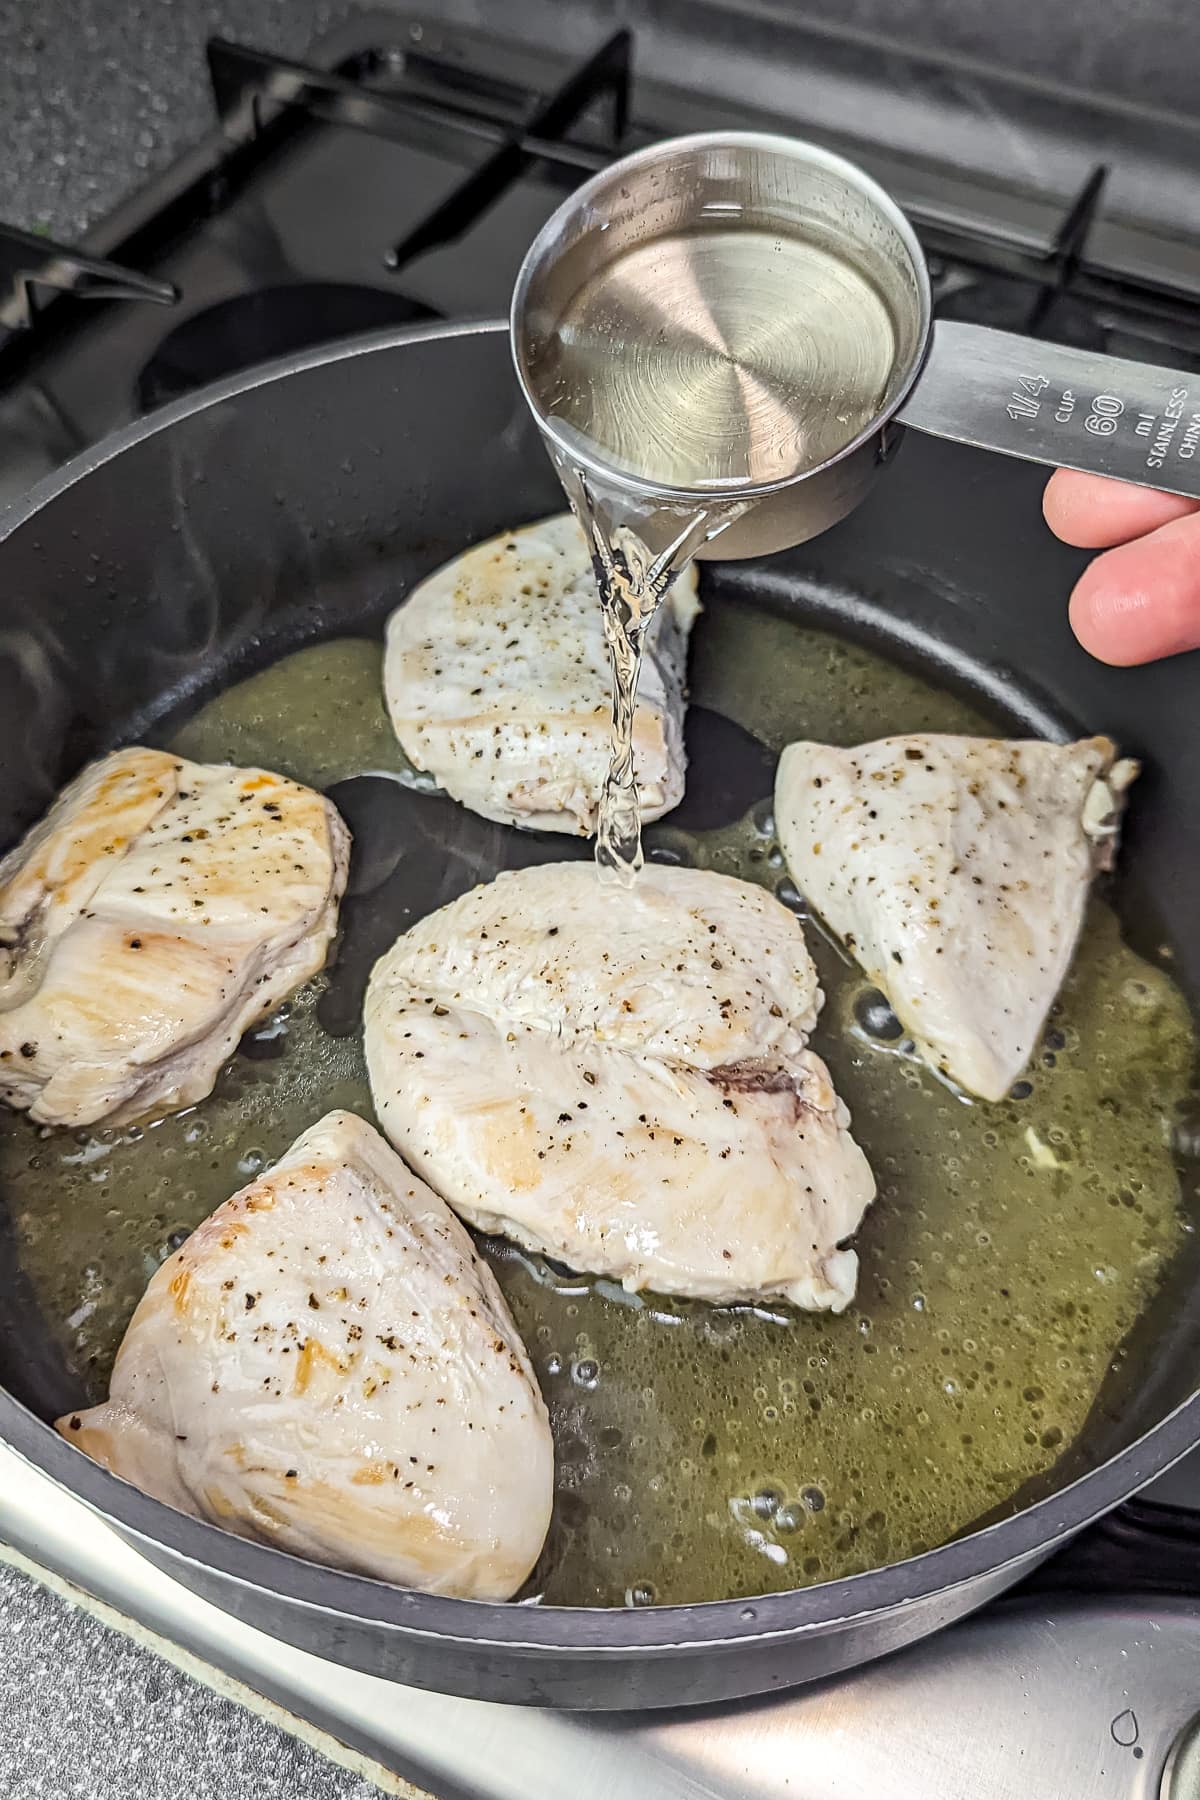 Searing chicken breasts in a skillet with a splash of white wine being added.